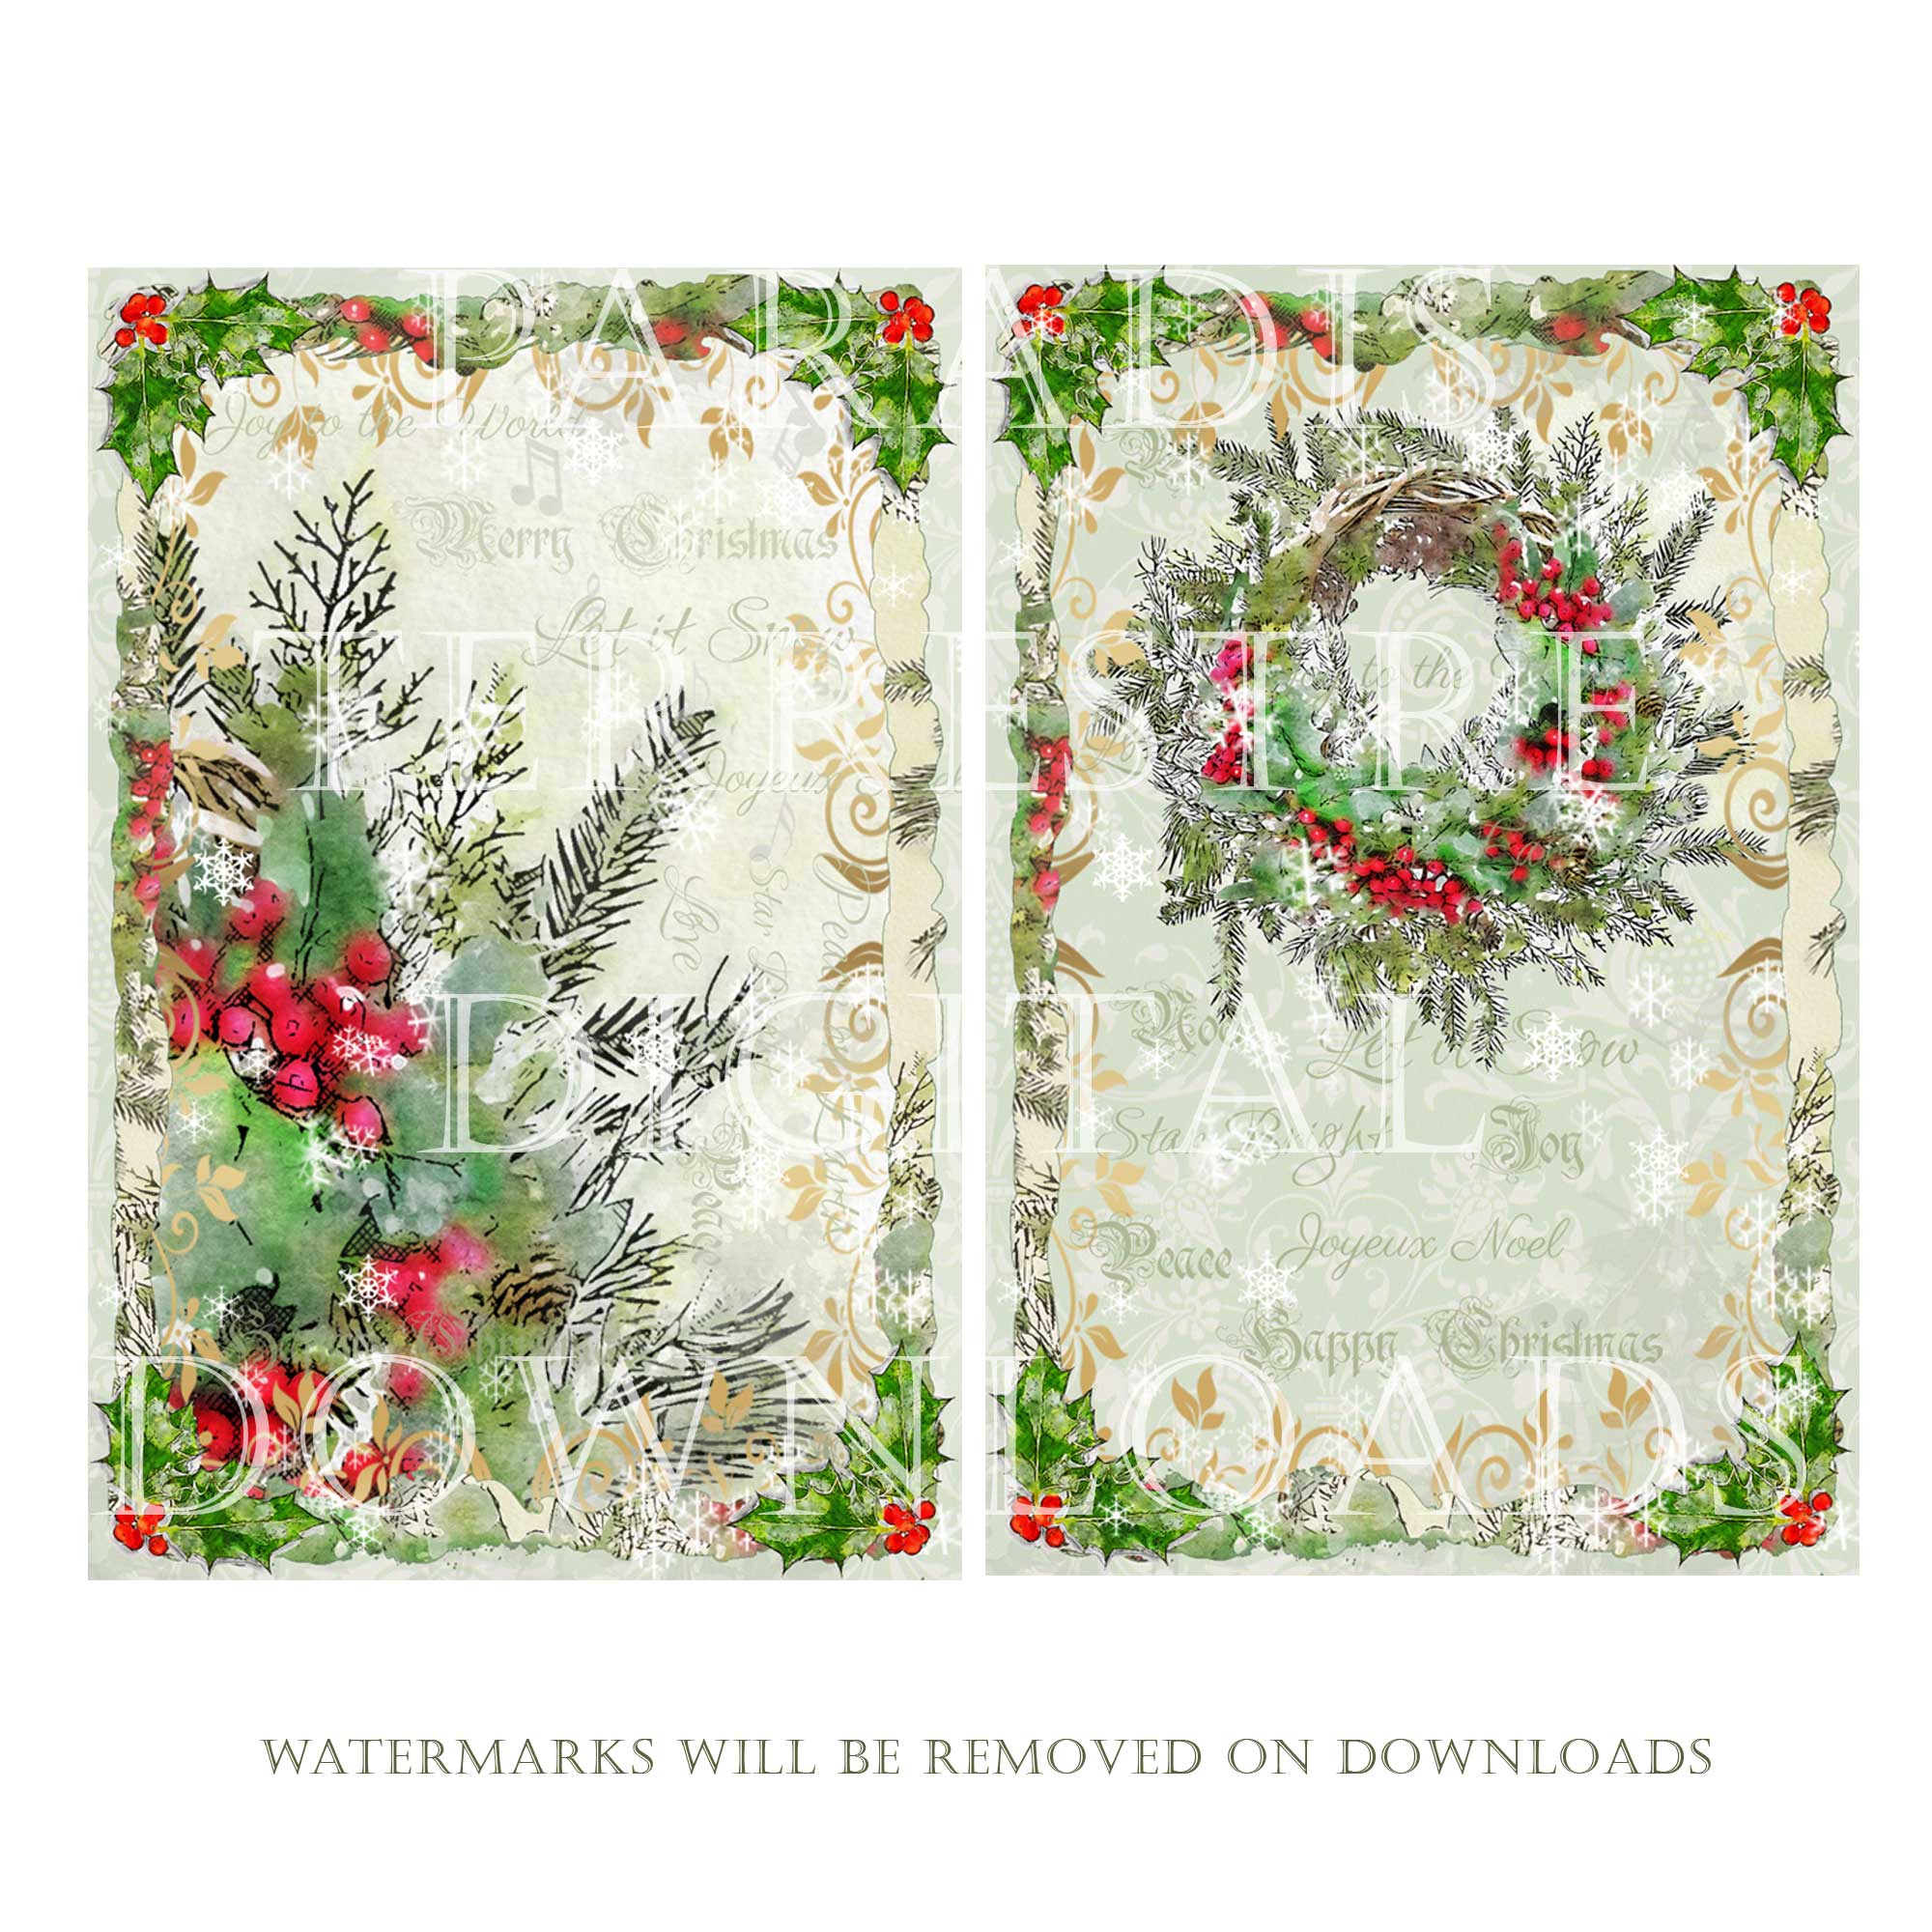 8-printable-traditional-christmas-card-toppers-cardmaking-10cmx15cm-4-x